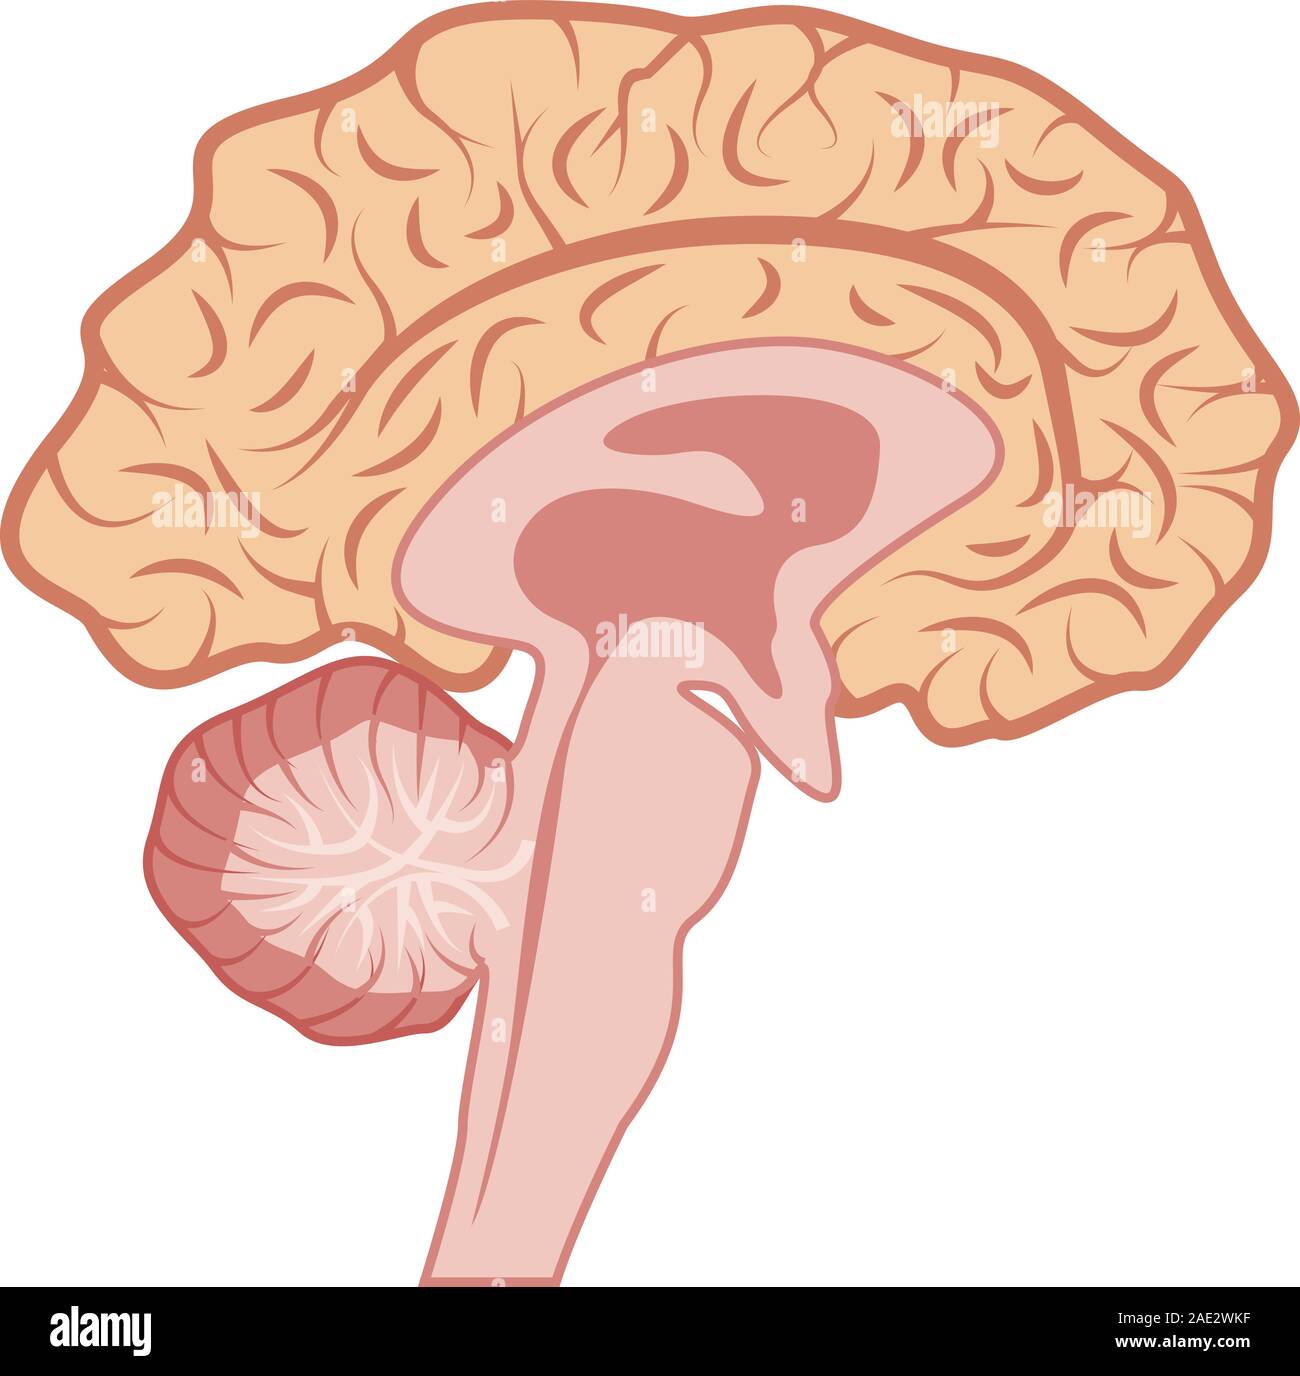 Vector illustration of human sectional brain isolated on a white background Stock Vector